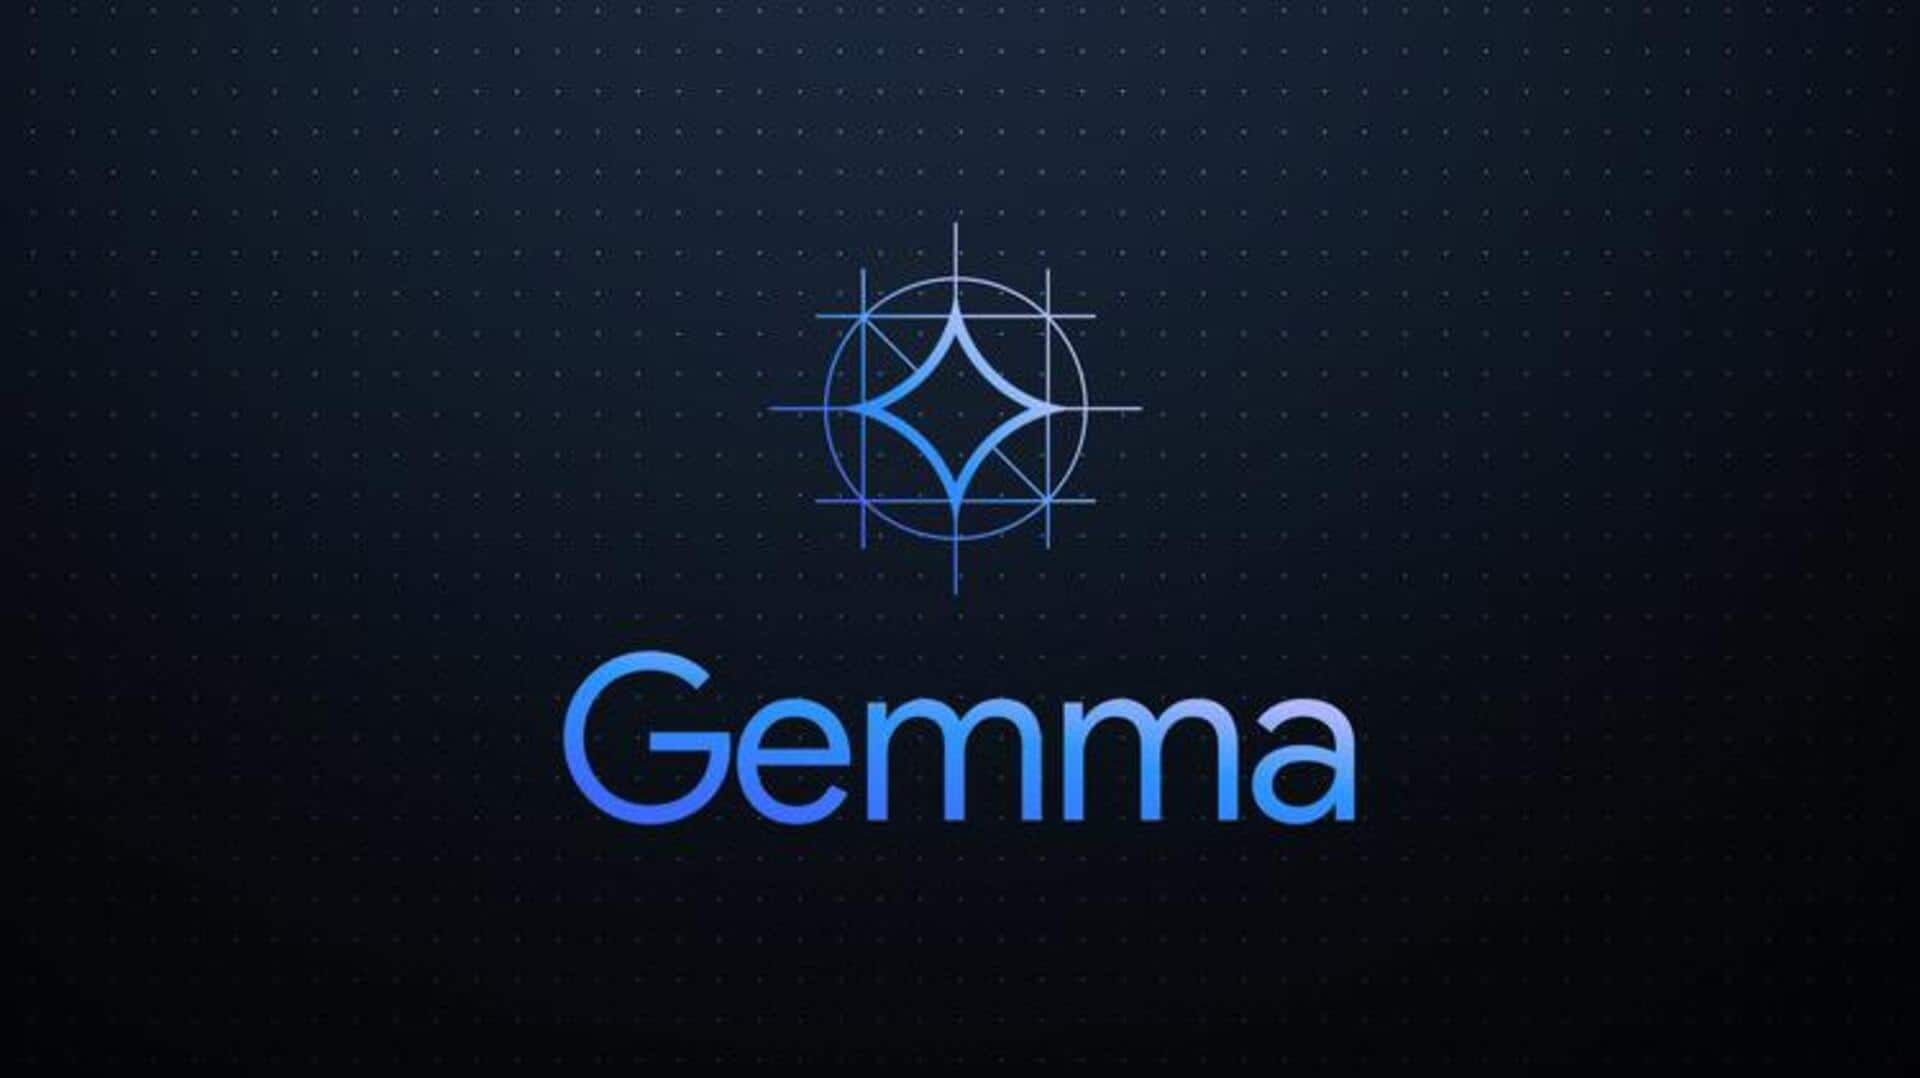 Google releases Gemma 2B, 7B open-source AI models: What's special?